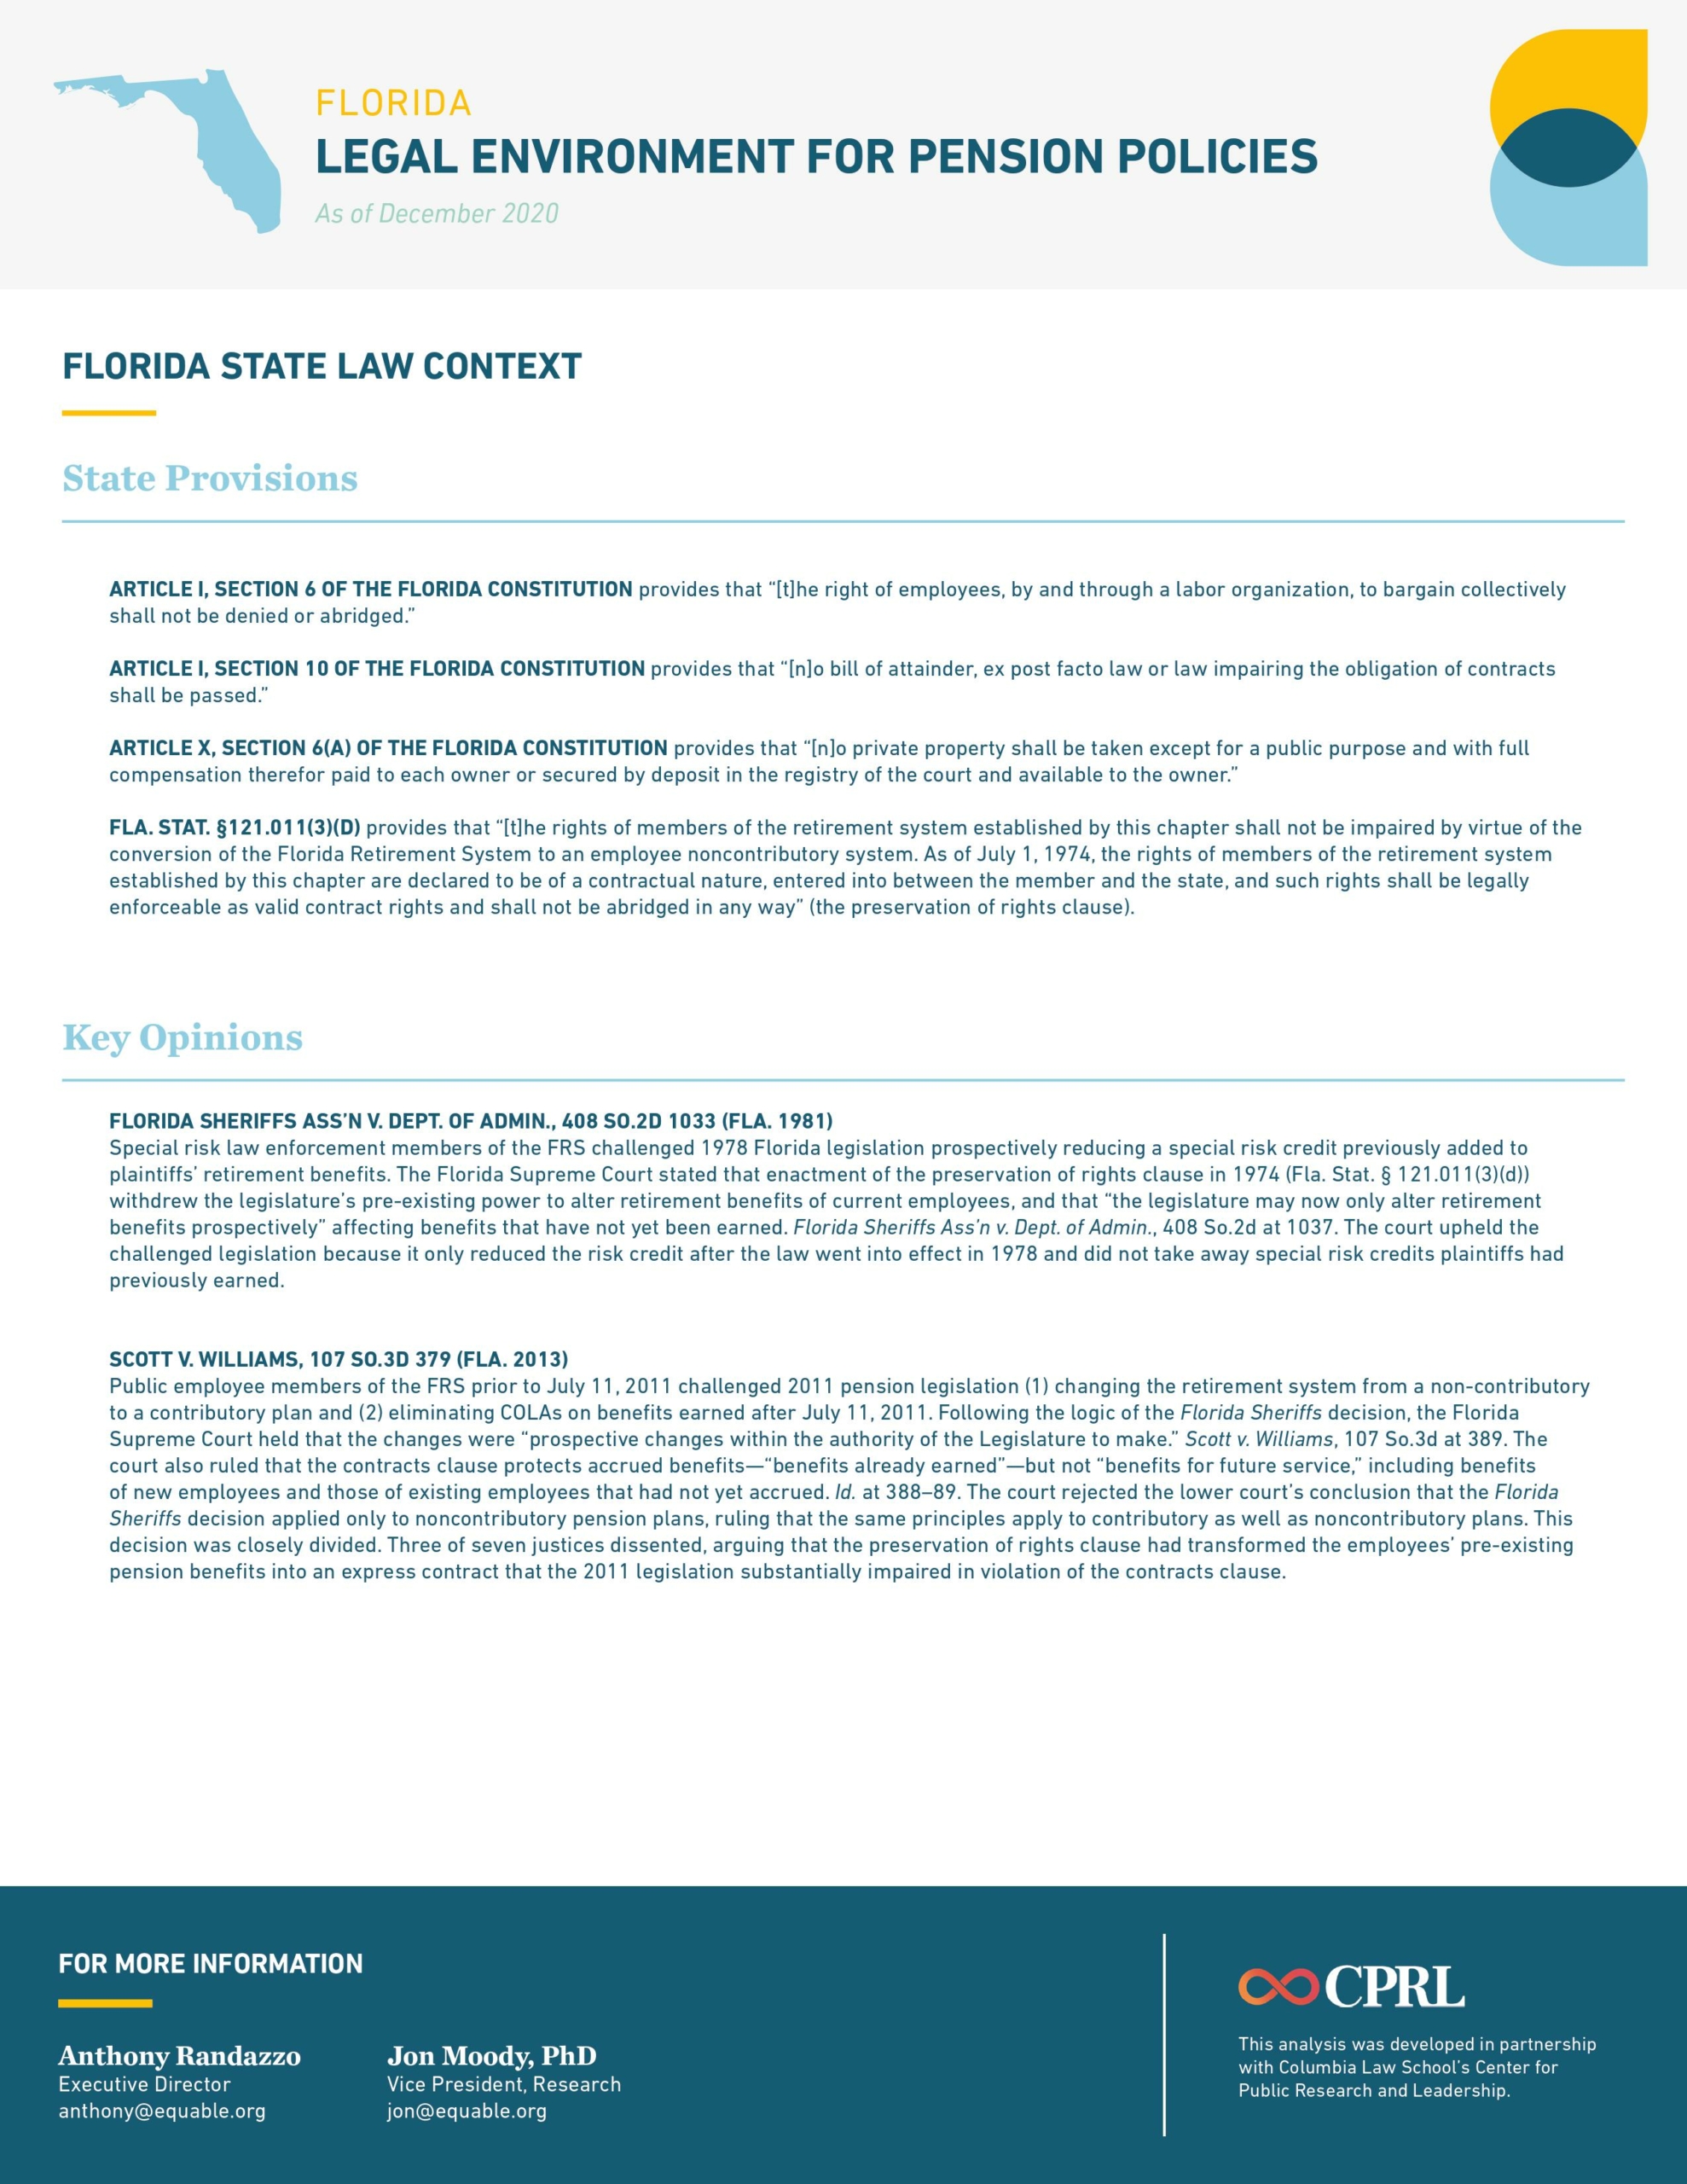 Florida Pension Laws Infographic - Page 2